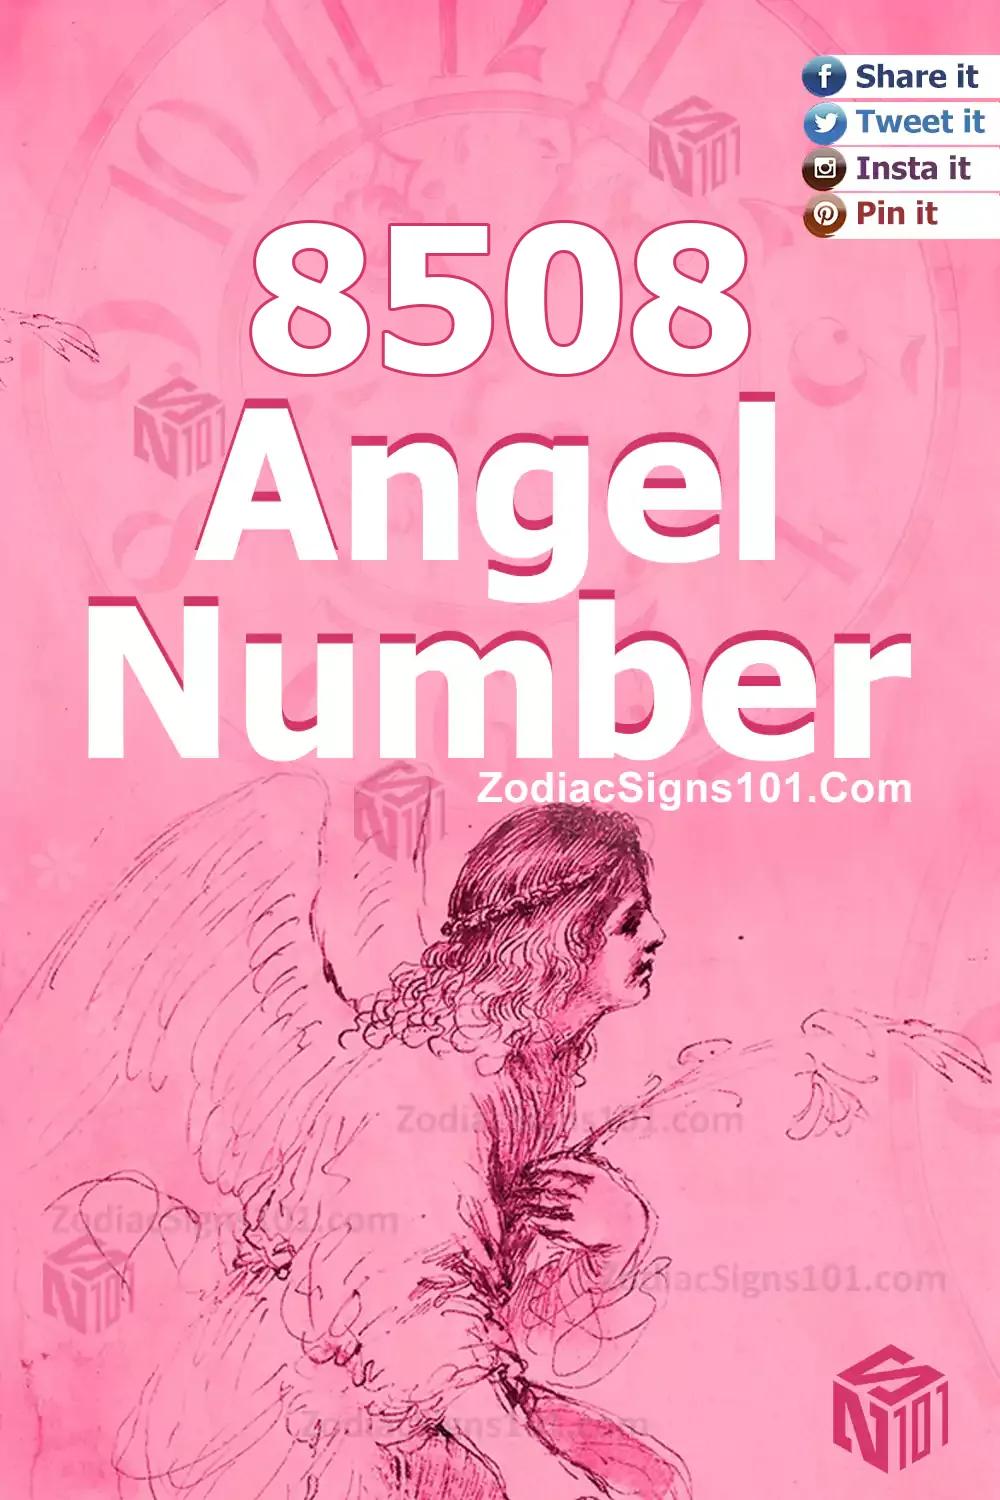 8508 Angel Number Meaning